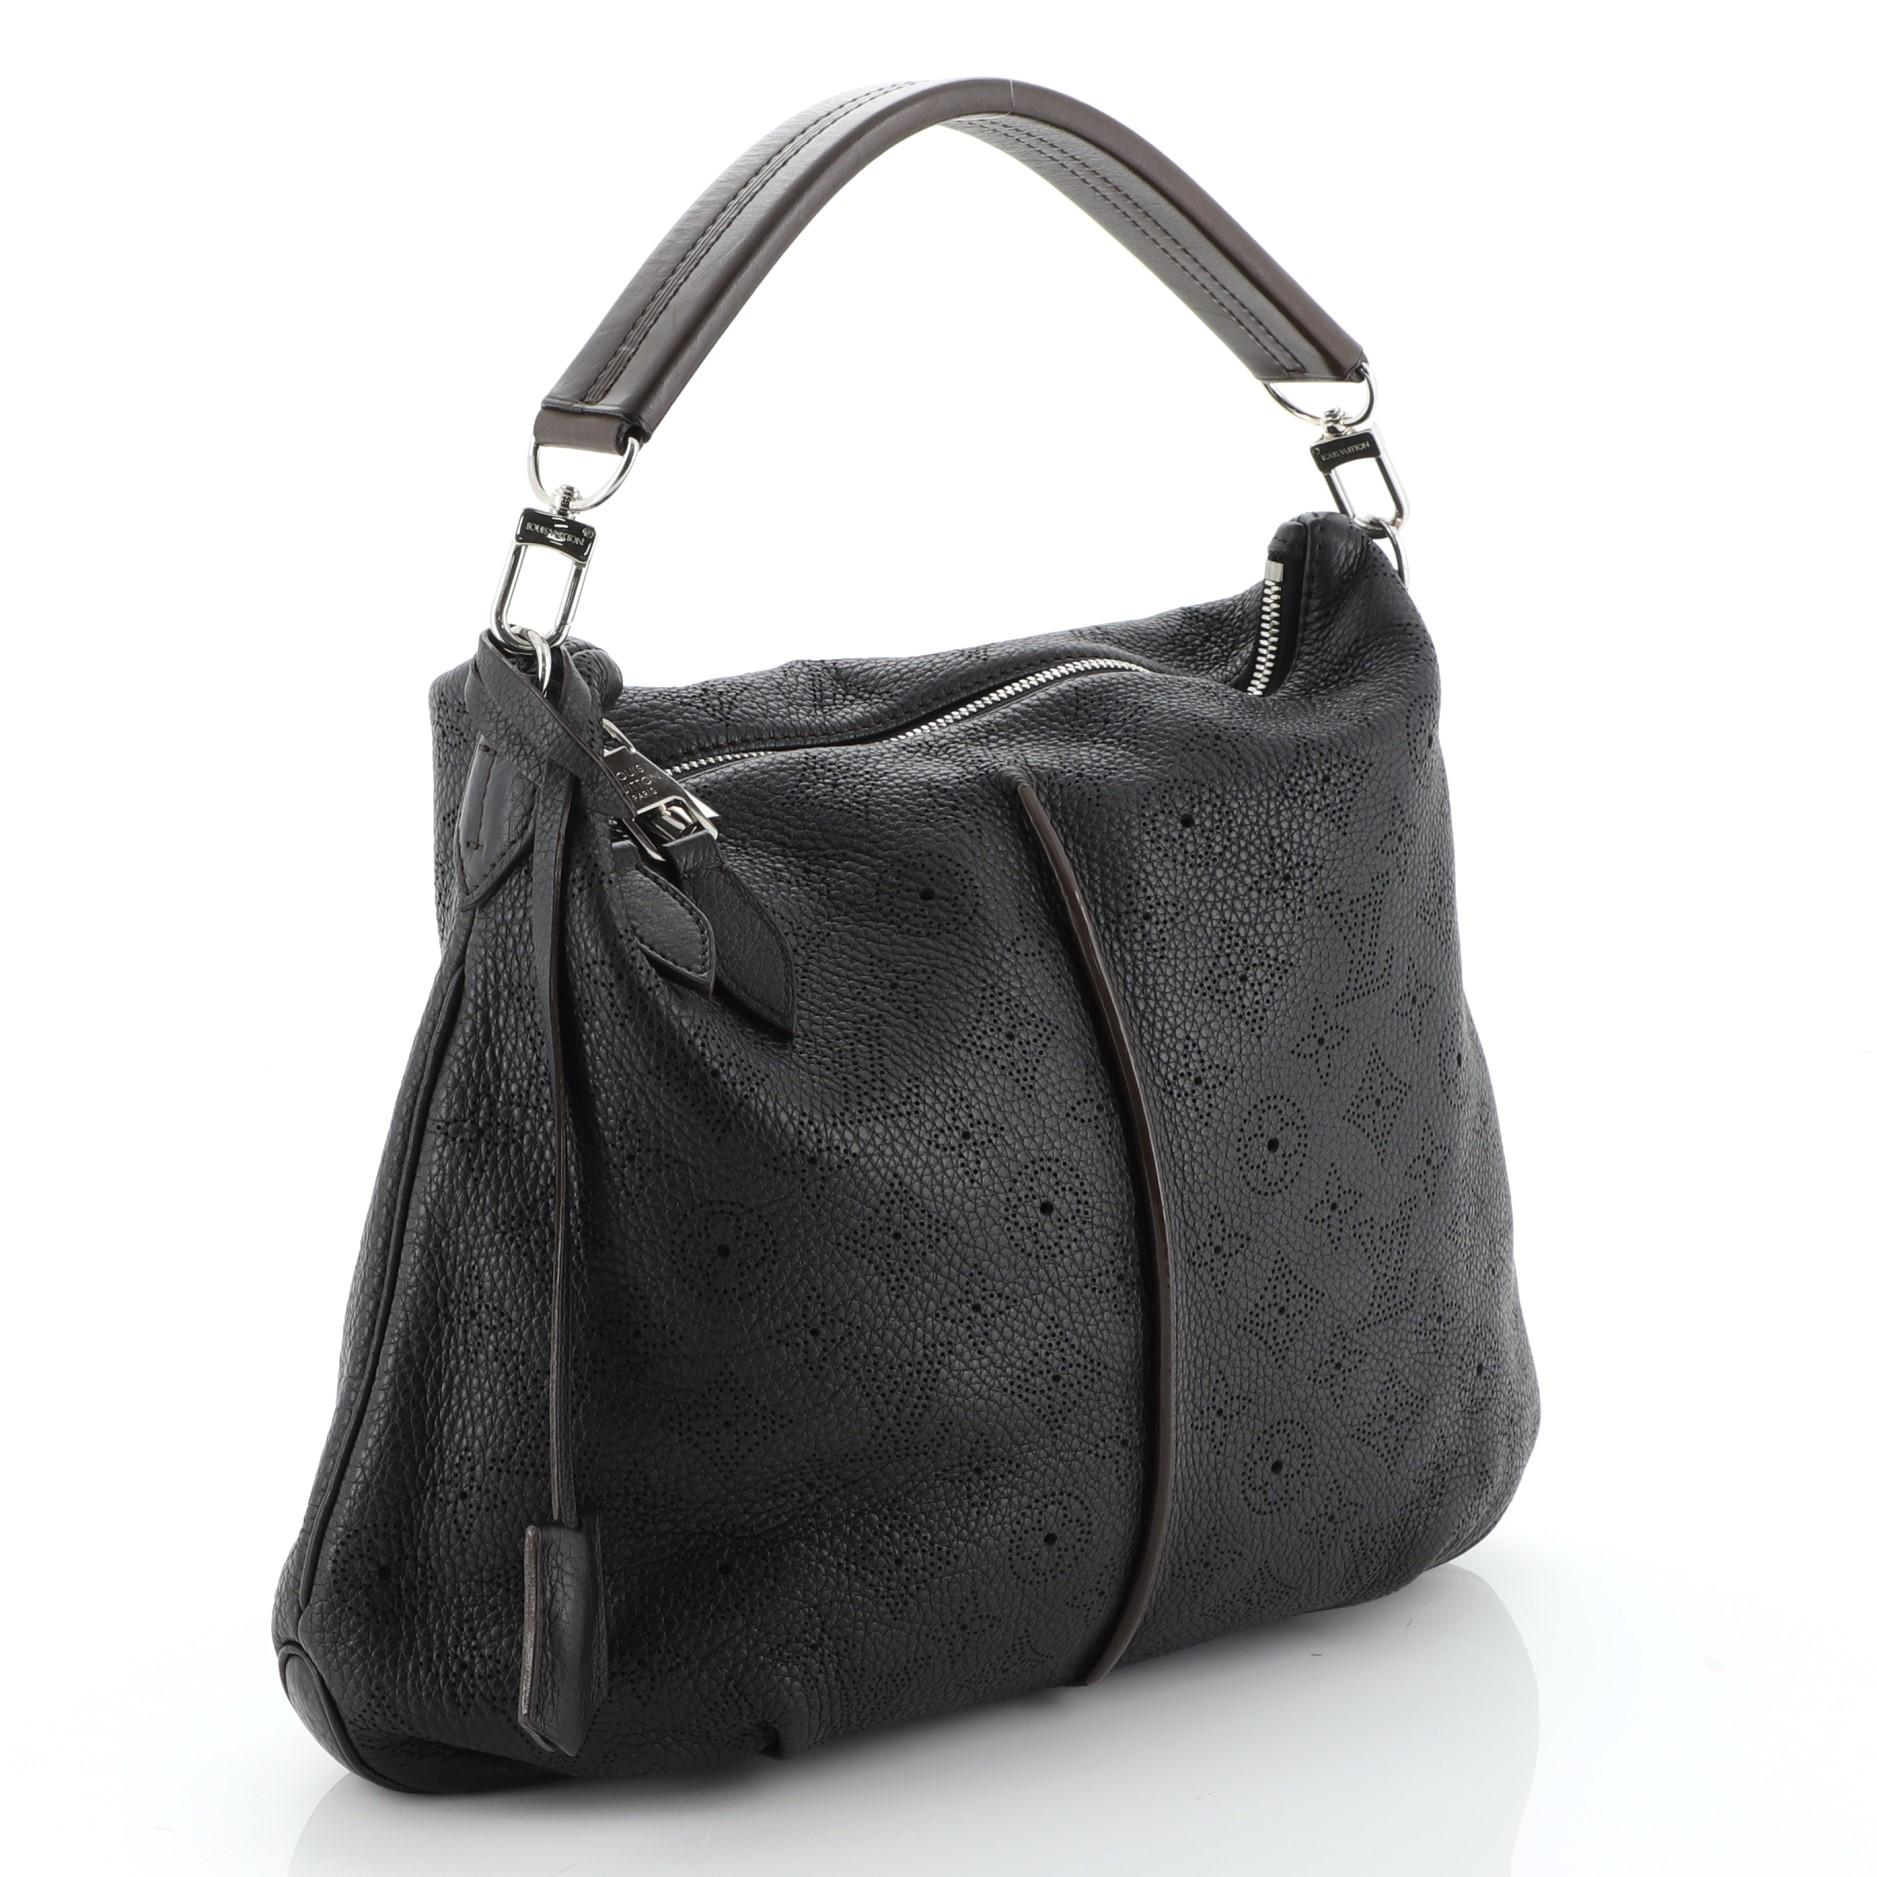 This Louis Vuitton Selene Handbag Mahina Leather PM, crafted from black monogram perforated mahina leather, features a leather handle, pleated detailing, and silver-tone hardware. Its zip closure opens to a brown microfiber interior with side zip